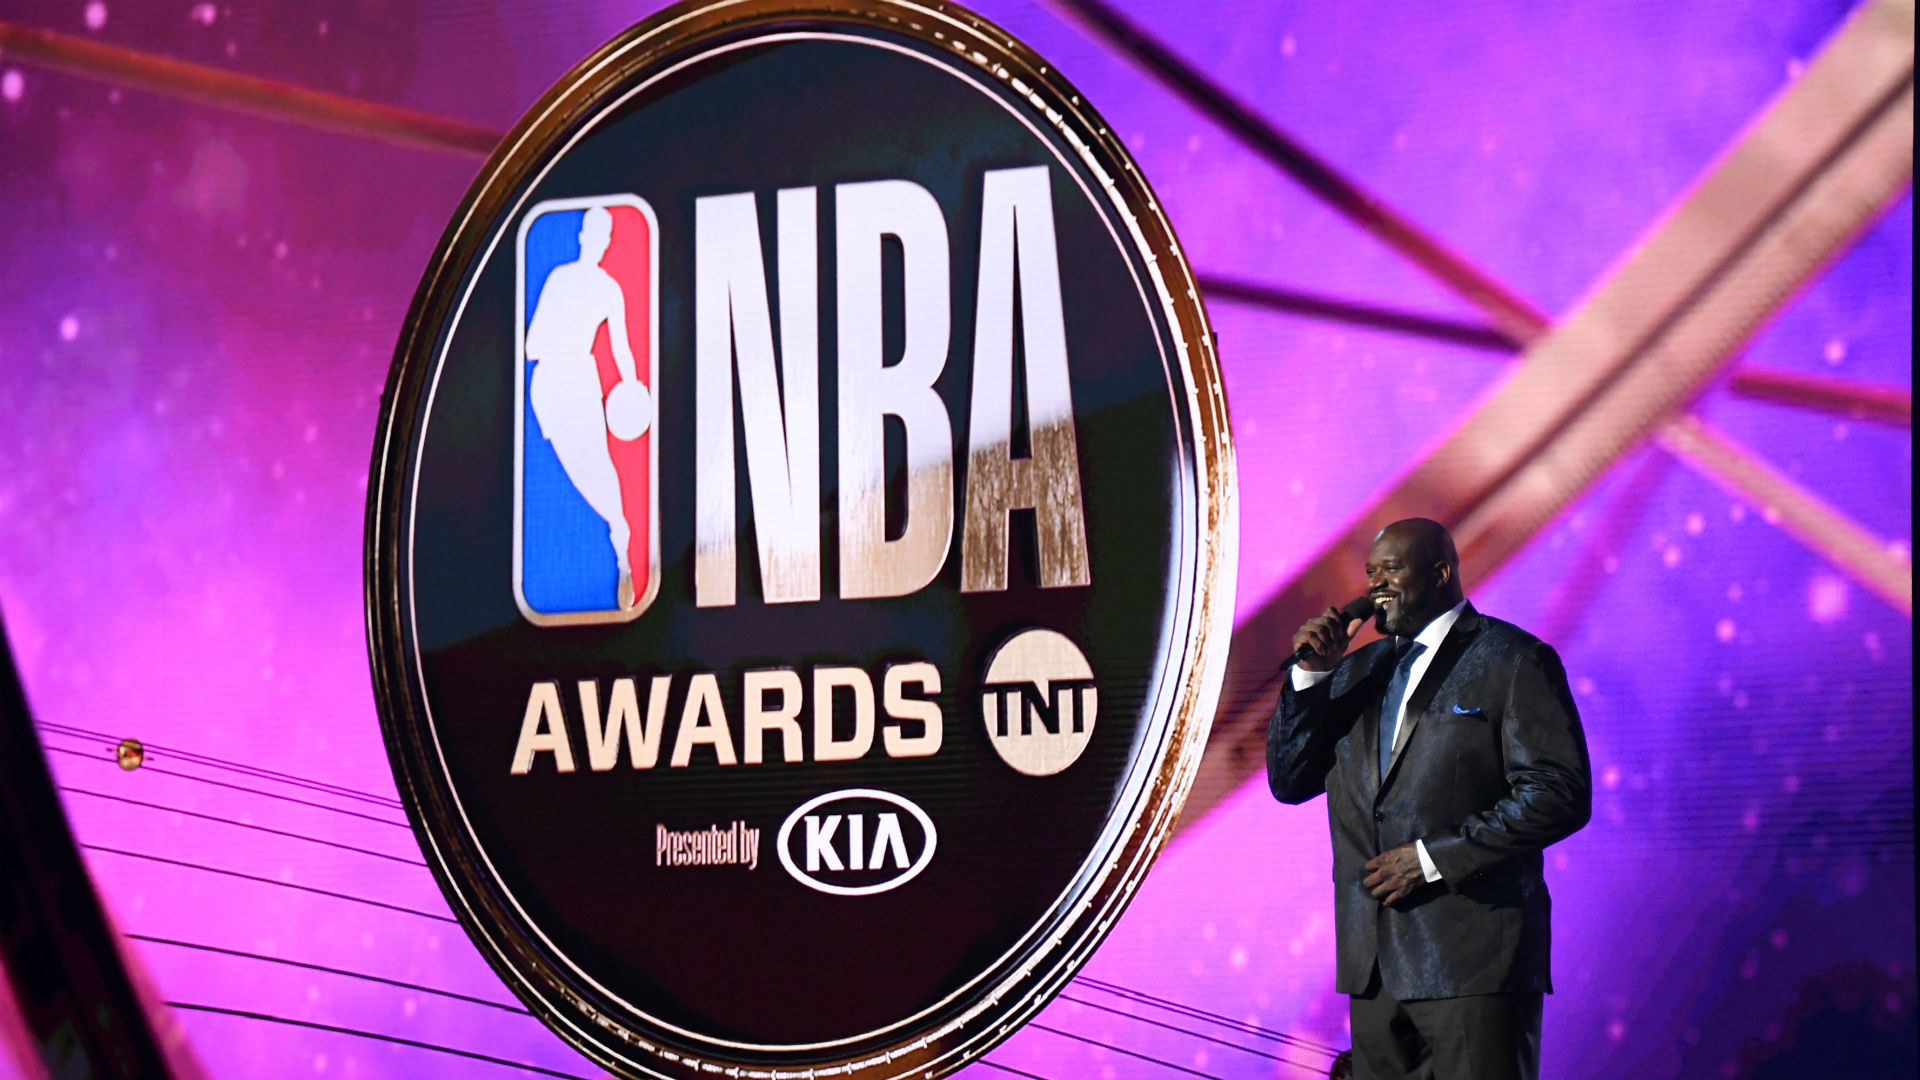 NBA Awards 2019: Live updates, highlights, video and more from the 2019 NBA Awards ...1920 x 1080